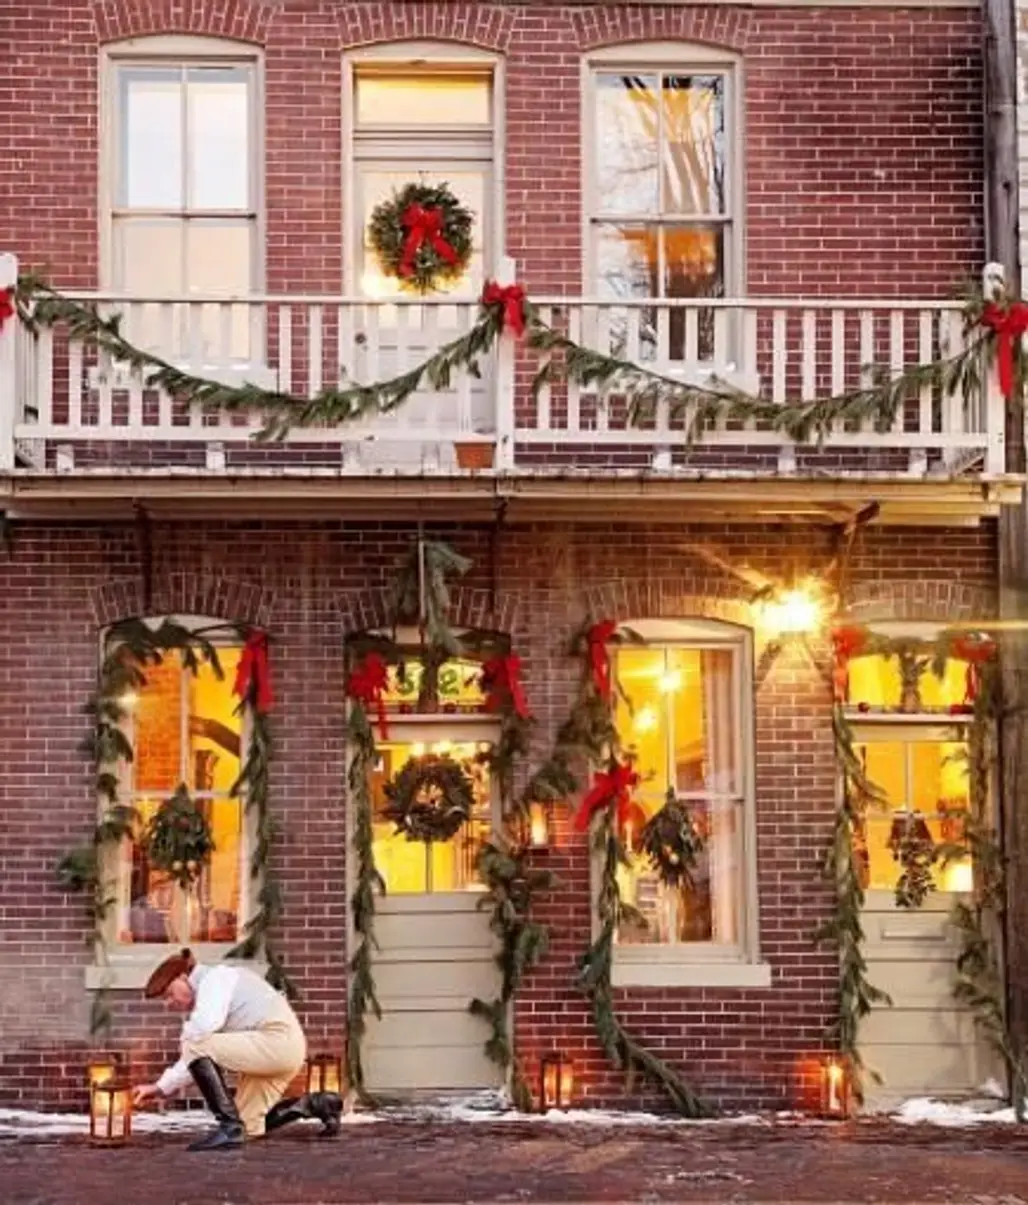 Celebrate Christmas in Historic St. Charles, USA